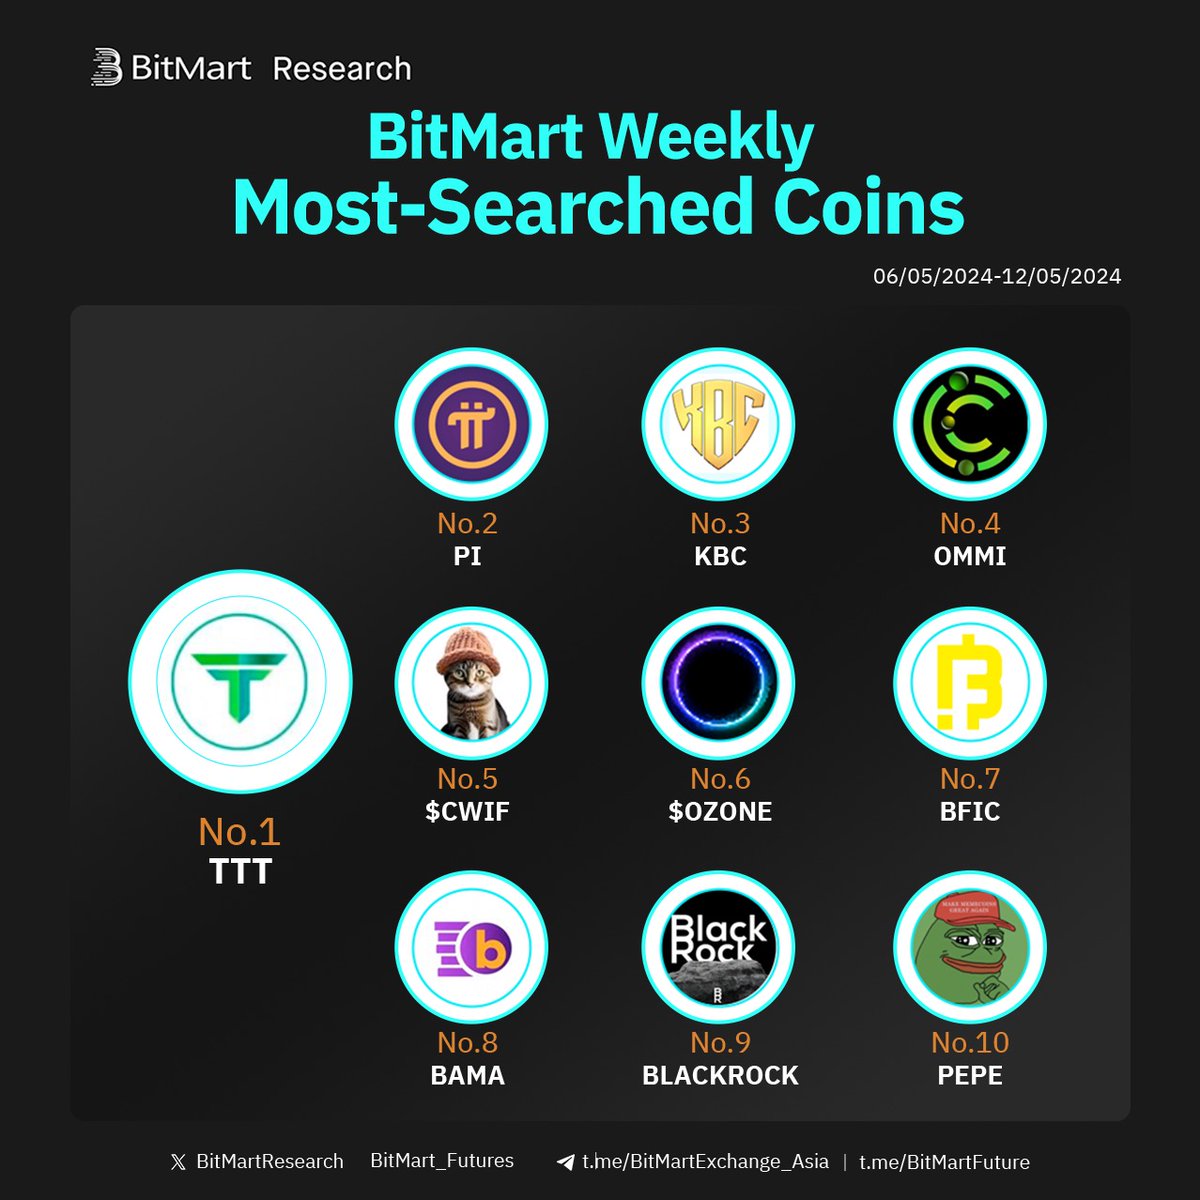 🧐Weekly Top 10 Most-Searched Coins on #BitMart 🥇 $TTT -@TeamTitanFi 🥈 $PI-@PiCoreTeam 🥉 $KBC-@kibhocoin 🧐Buy any? ▶️Trade:datasink.bitmart.site/t/zw #BTC #CRYPTO #Airdrops #Giveaway #Bitcoin #BitMart #BRC20 #ETH #Runes